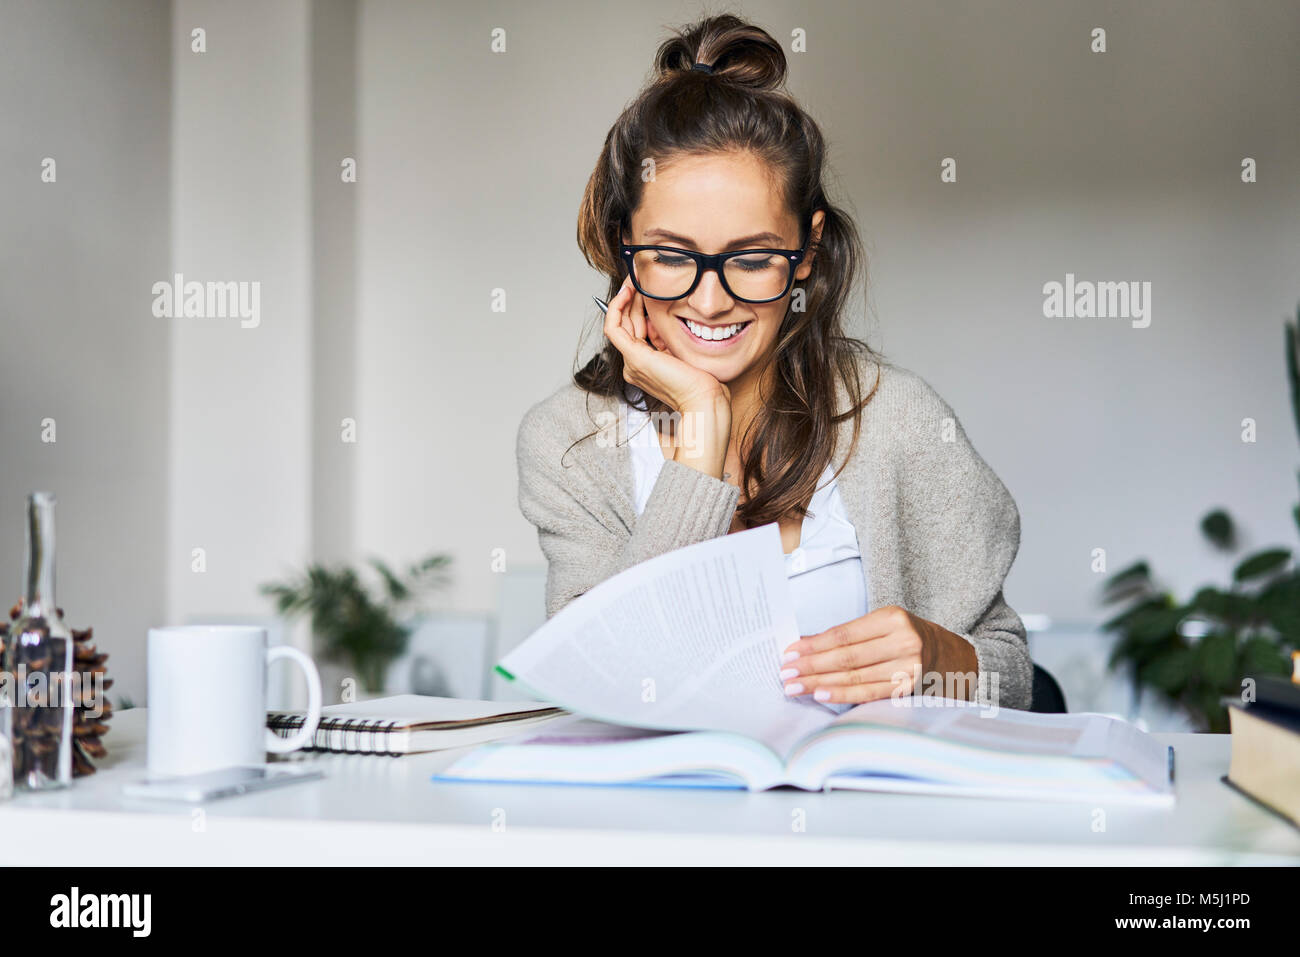 Happy female student learning at home Stock Photo